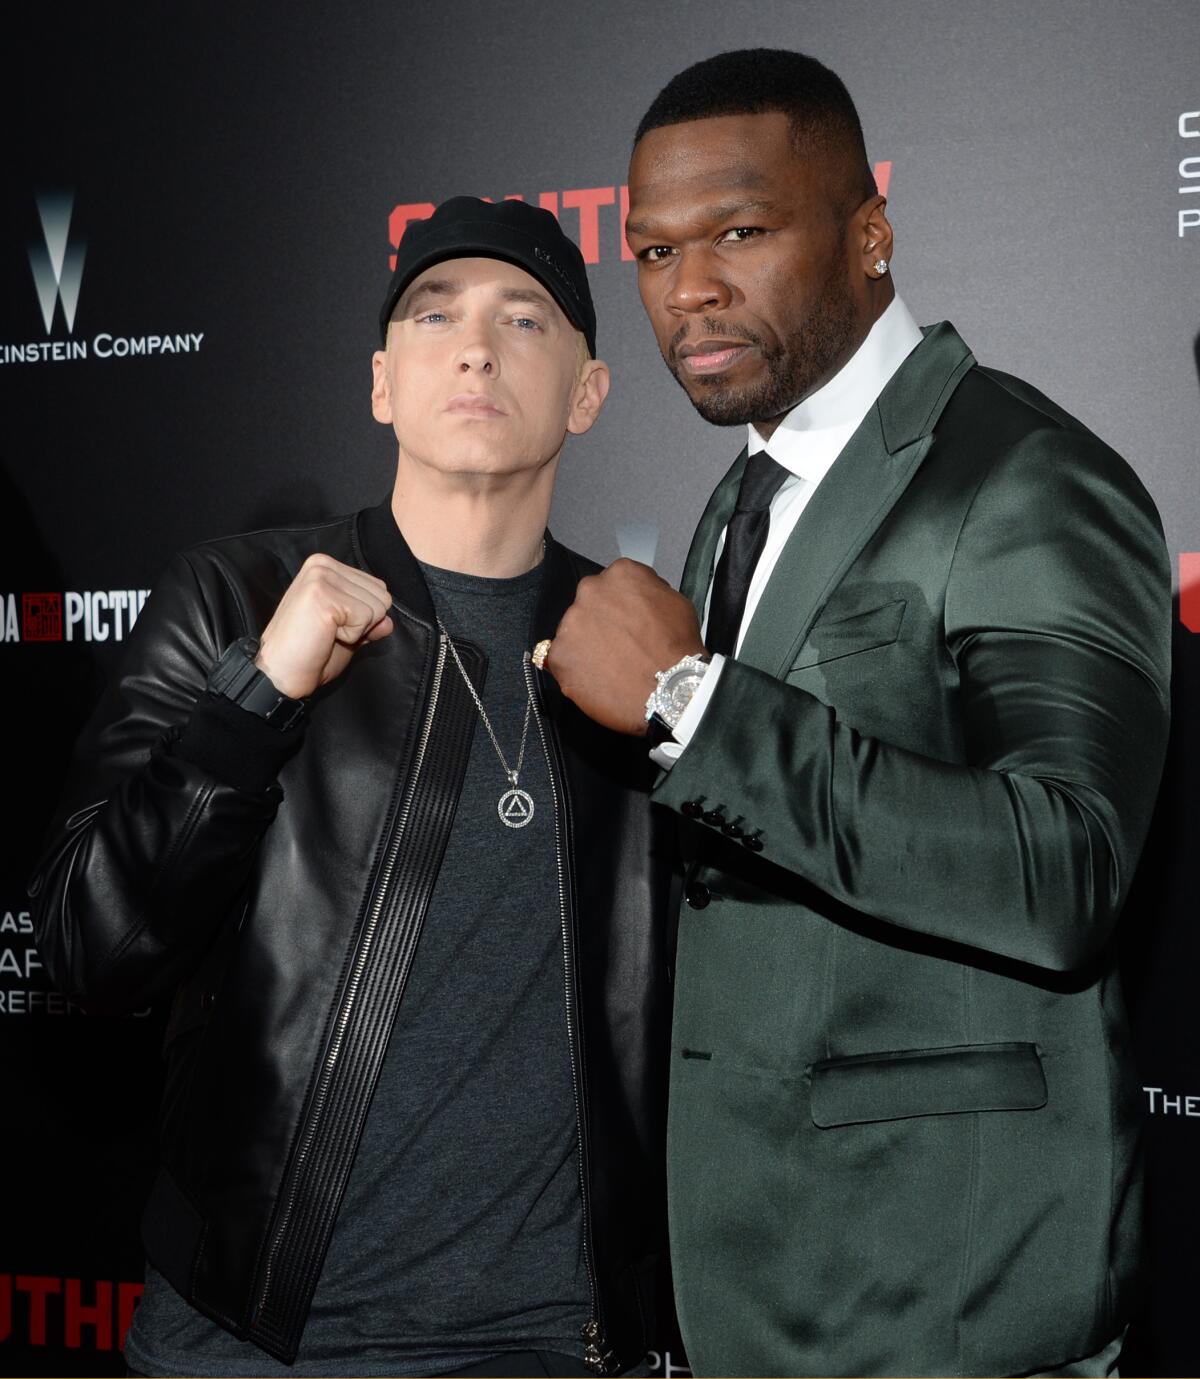 Eminem and 50 Cent each raise a fist as they pose together with serious faces